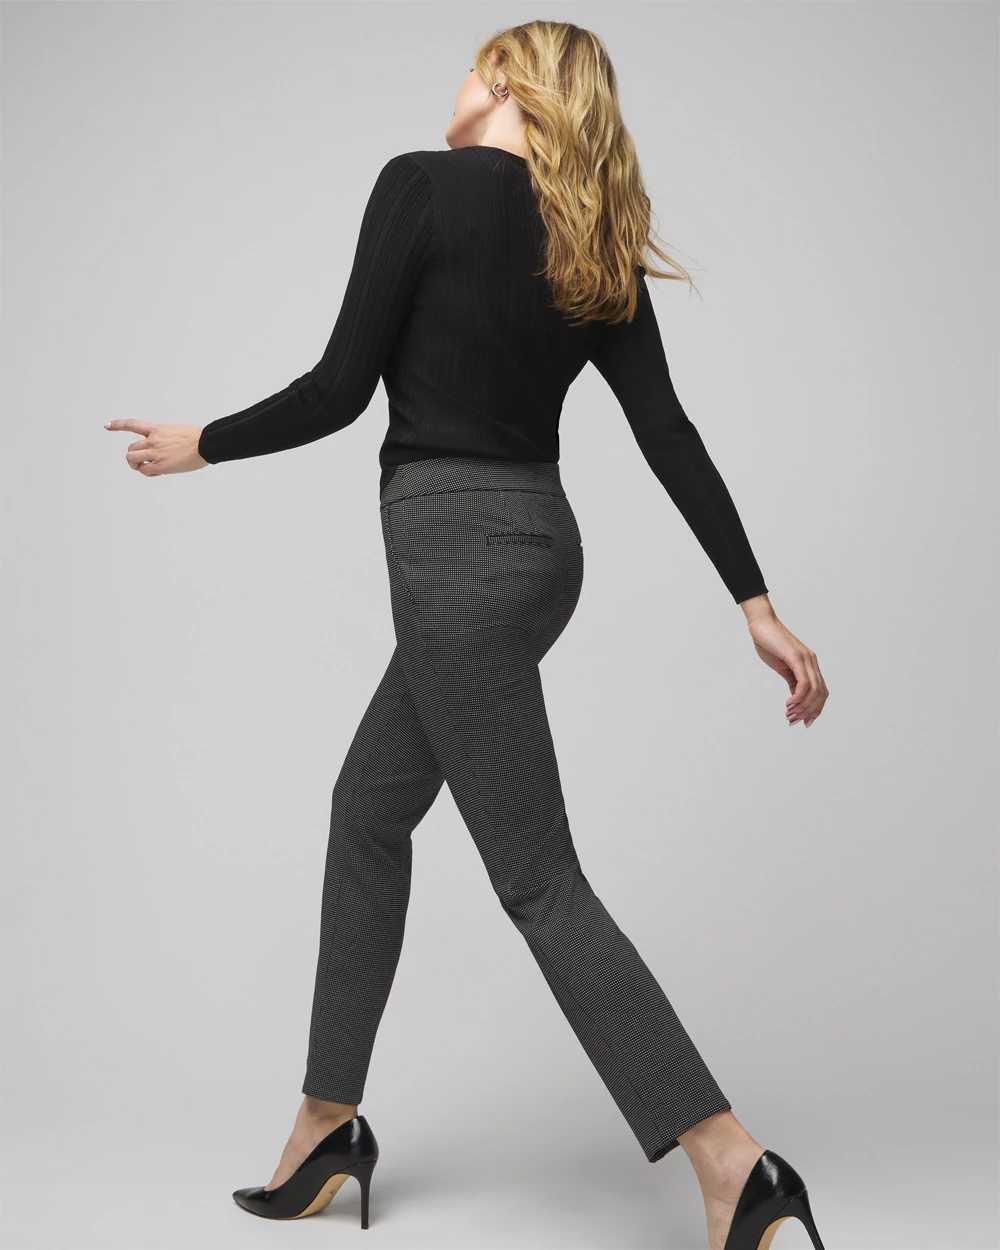 WHBM® Jolie Button Straight Pant click to view larger image.